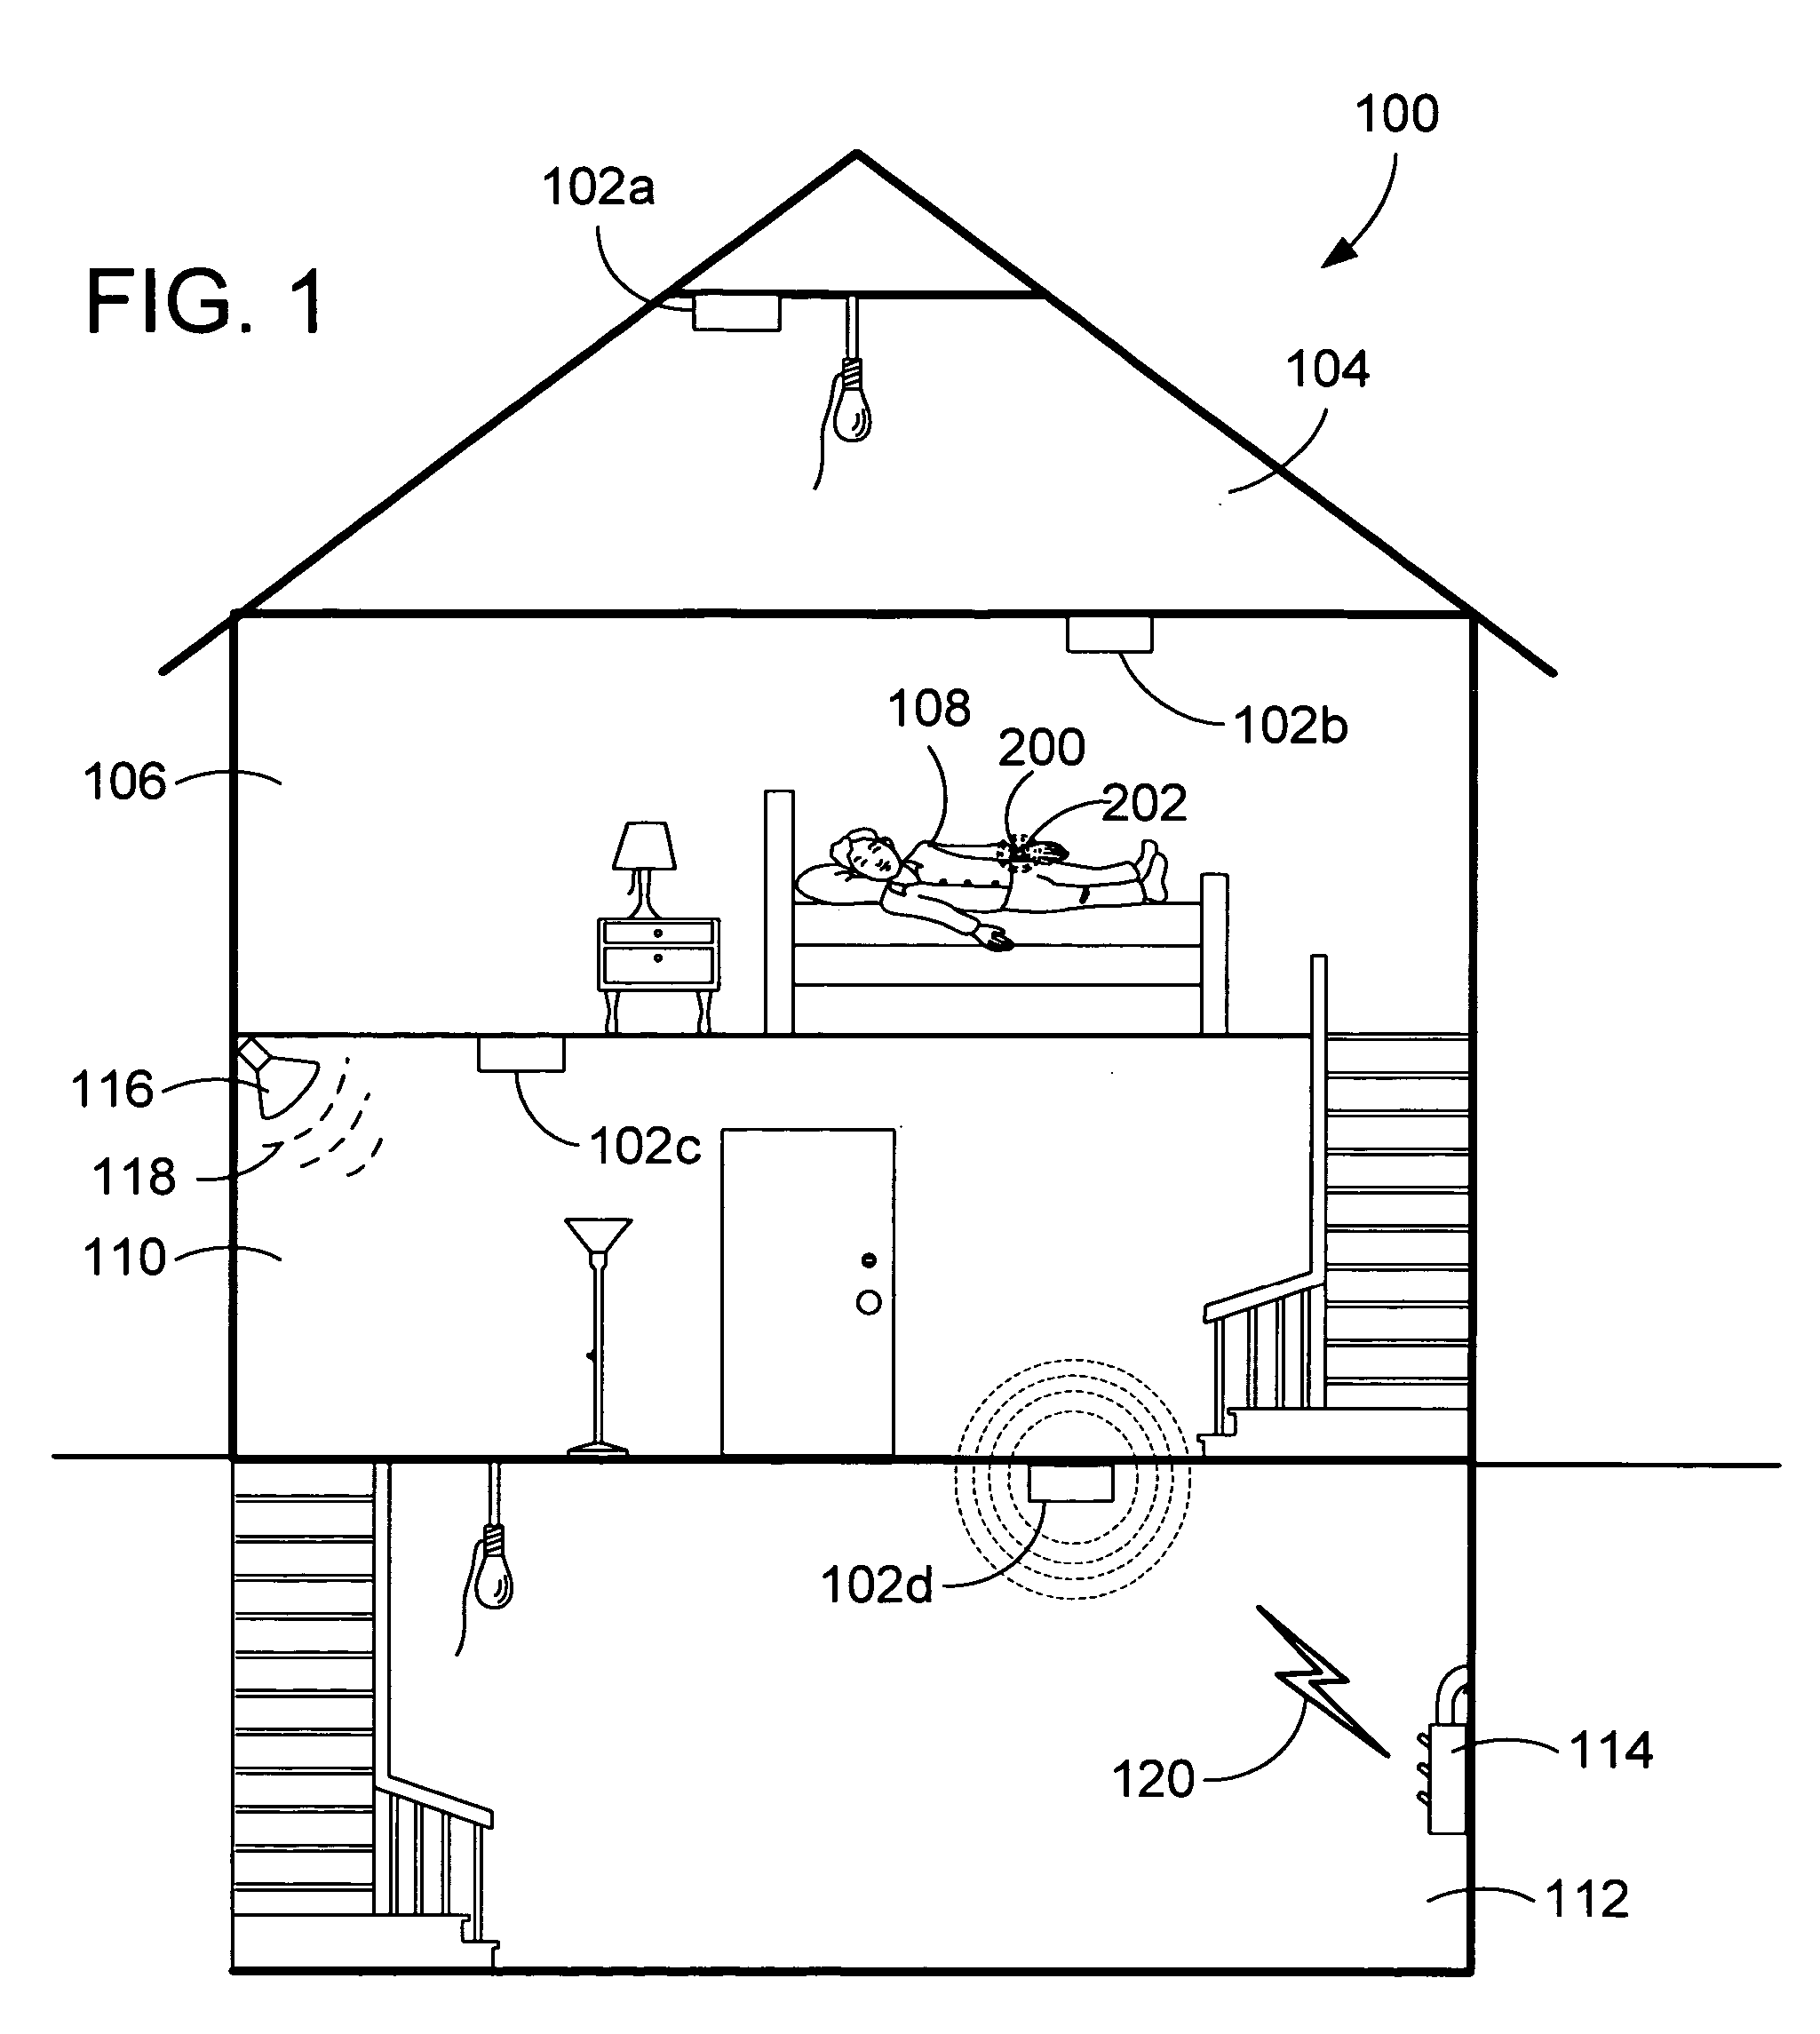 Device, system, and method for providing hazard warnings